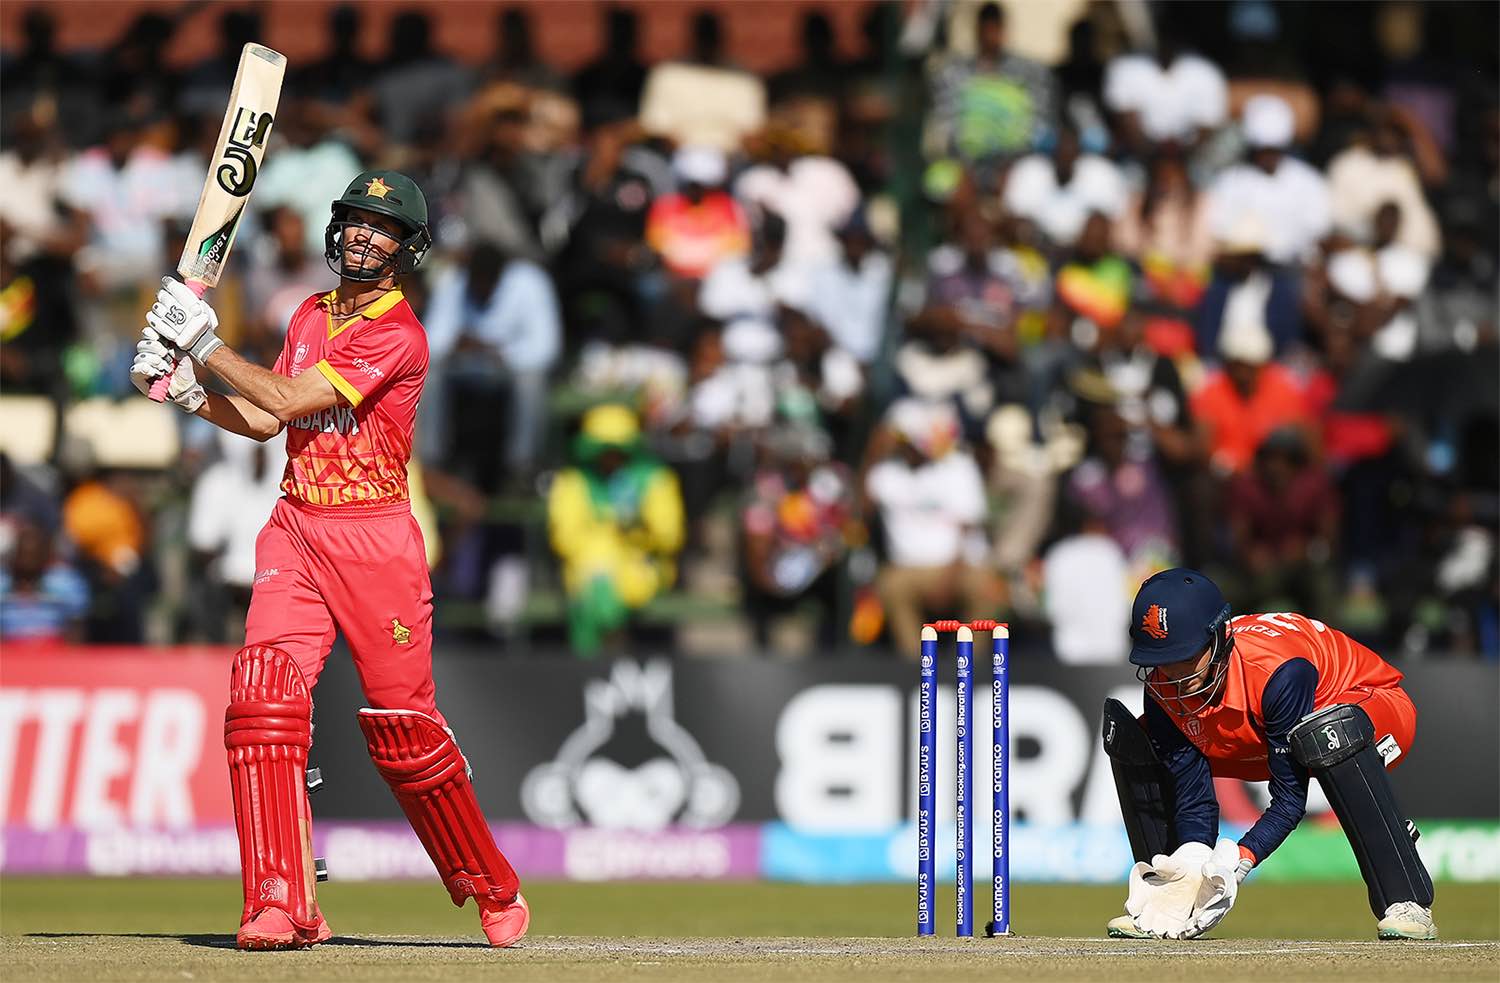 Two from two, Zimbabwe on a victorious start ahead on Saturday